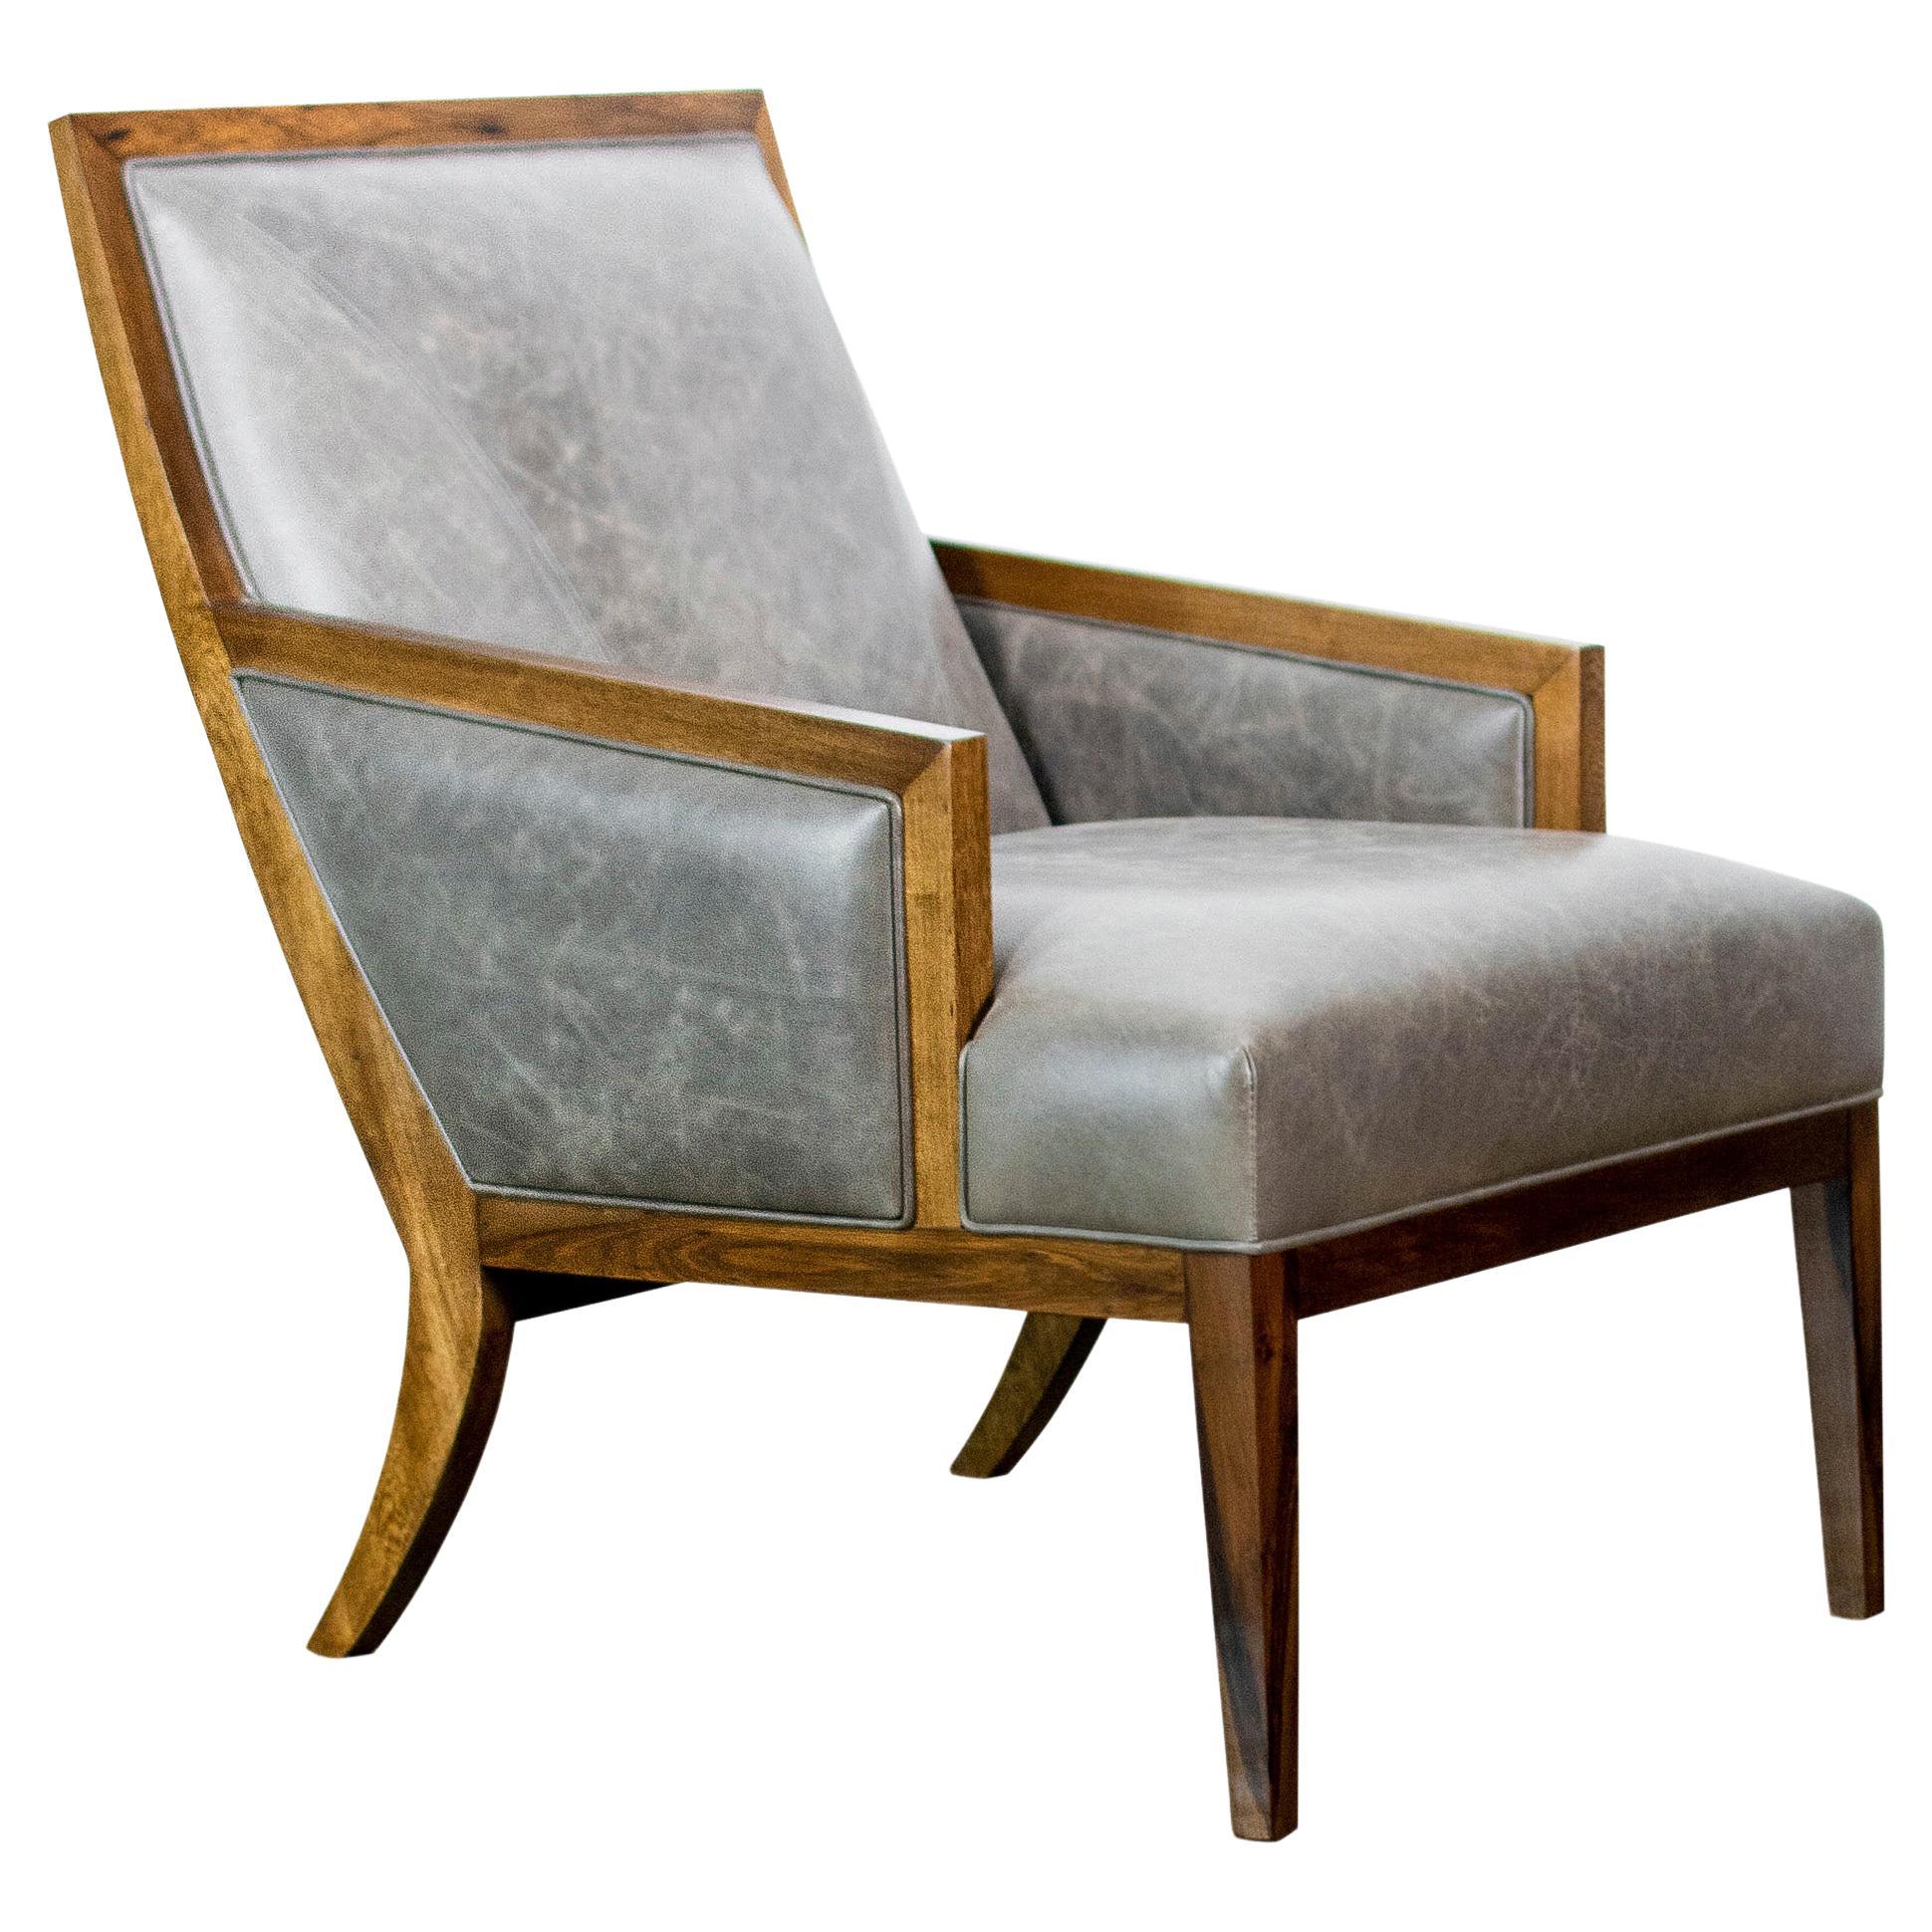 Modern Exotic Wood and Leather Lounge Chair from Costantini, Belgrano 'In Stock'